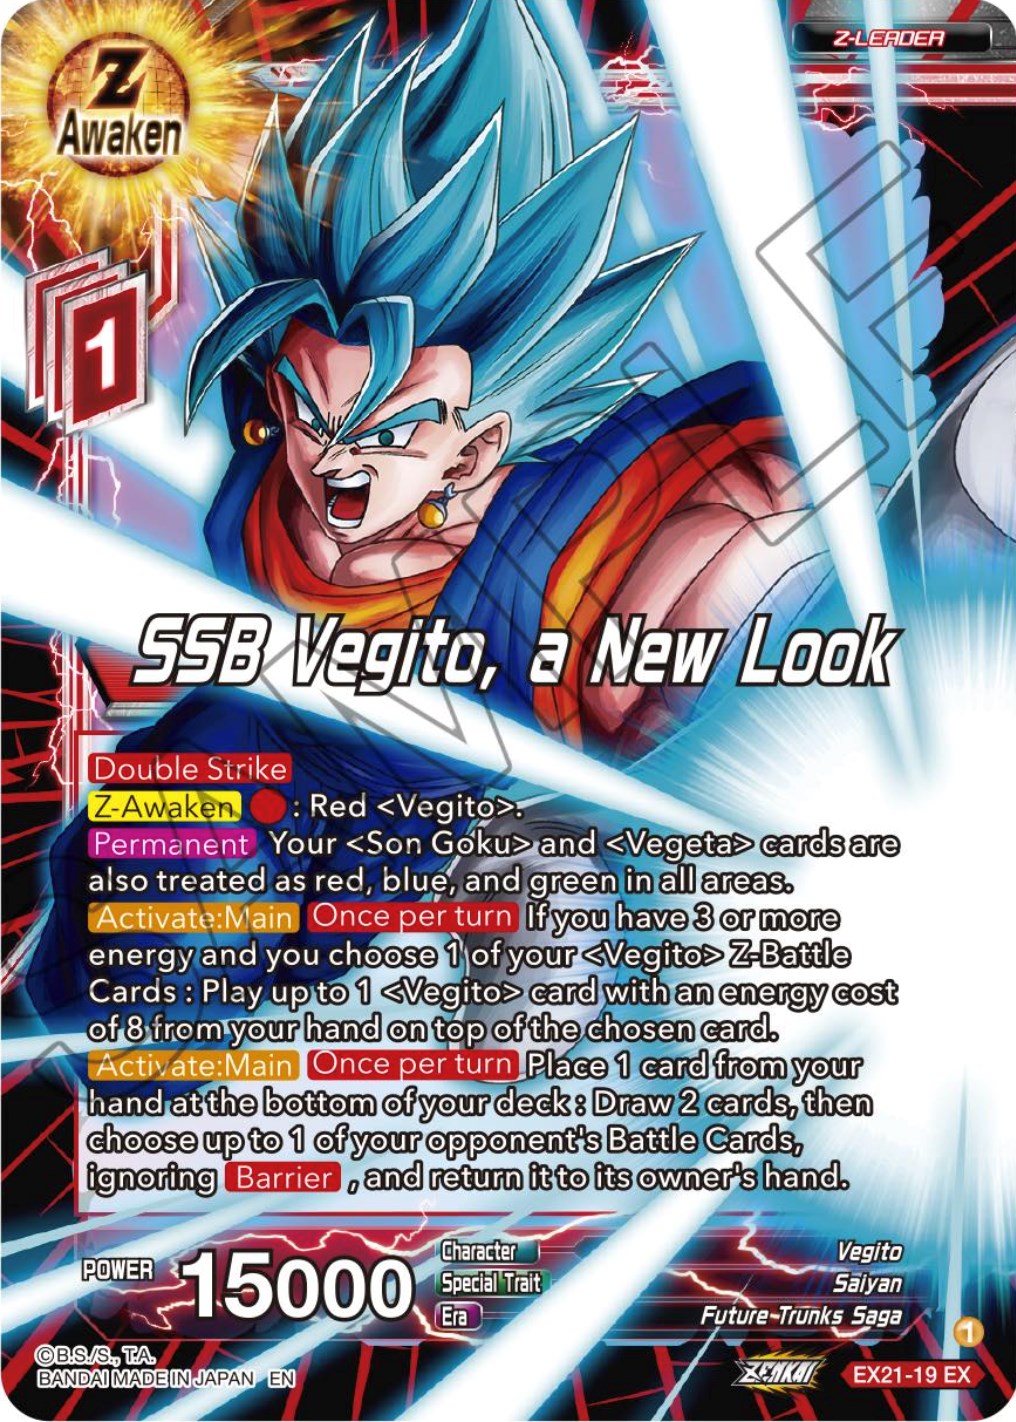 NEW CODE]🌌NEW EXCLUSIVE VEGITO MR IS OP! BEST UNIT SHOWCASE ANIME